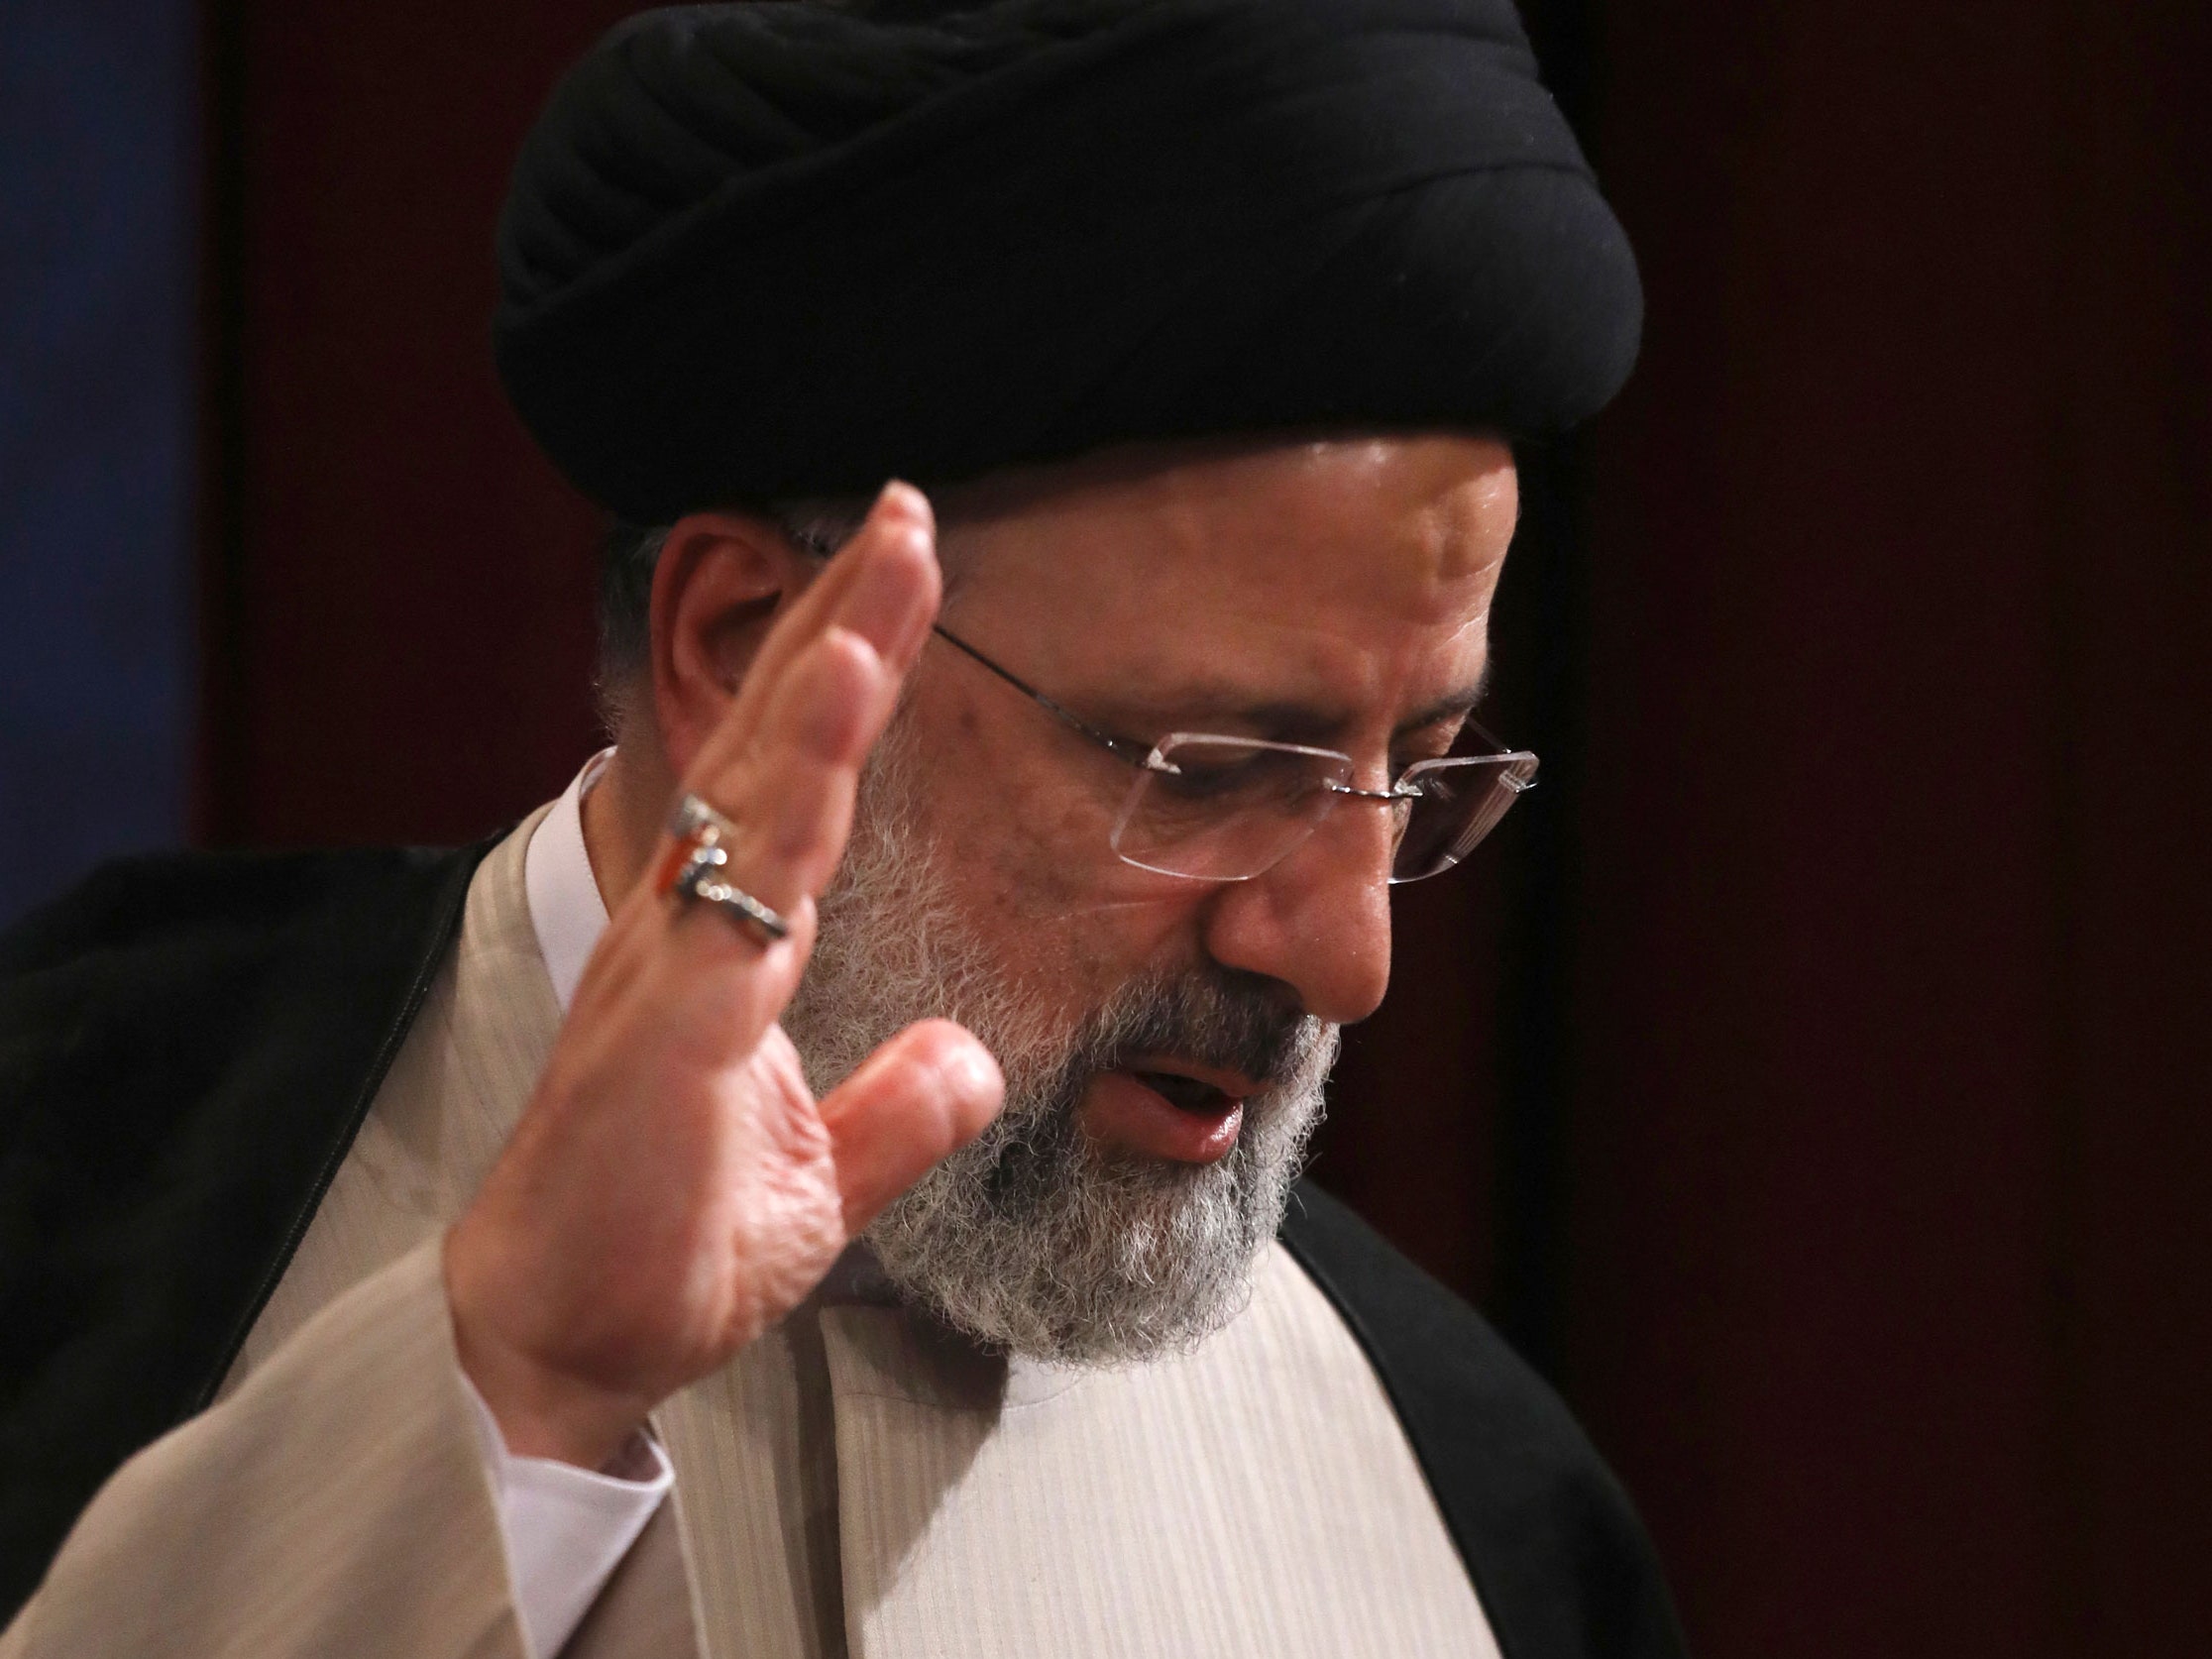 Former UN  judges and investigators have called on UN human rights chief Michelle Bachelet to investigate Iranian President Ebrahim Raisi's (in pic) role in the 1988 massacre of political prisoners.